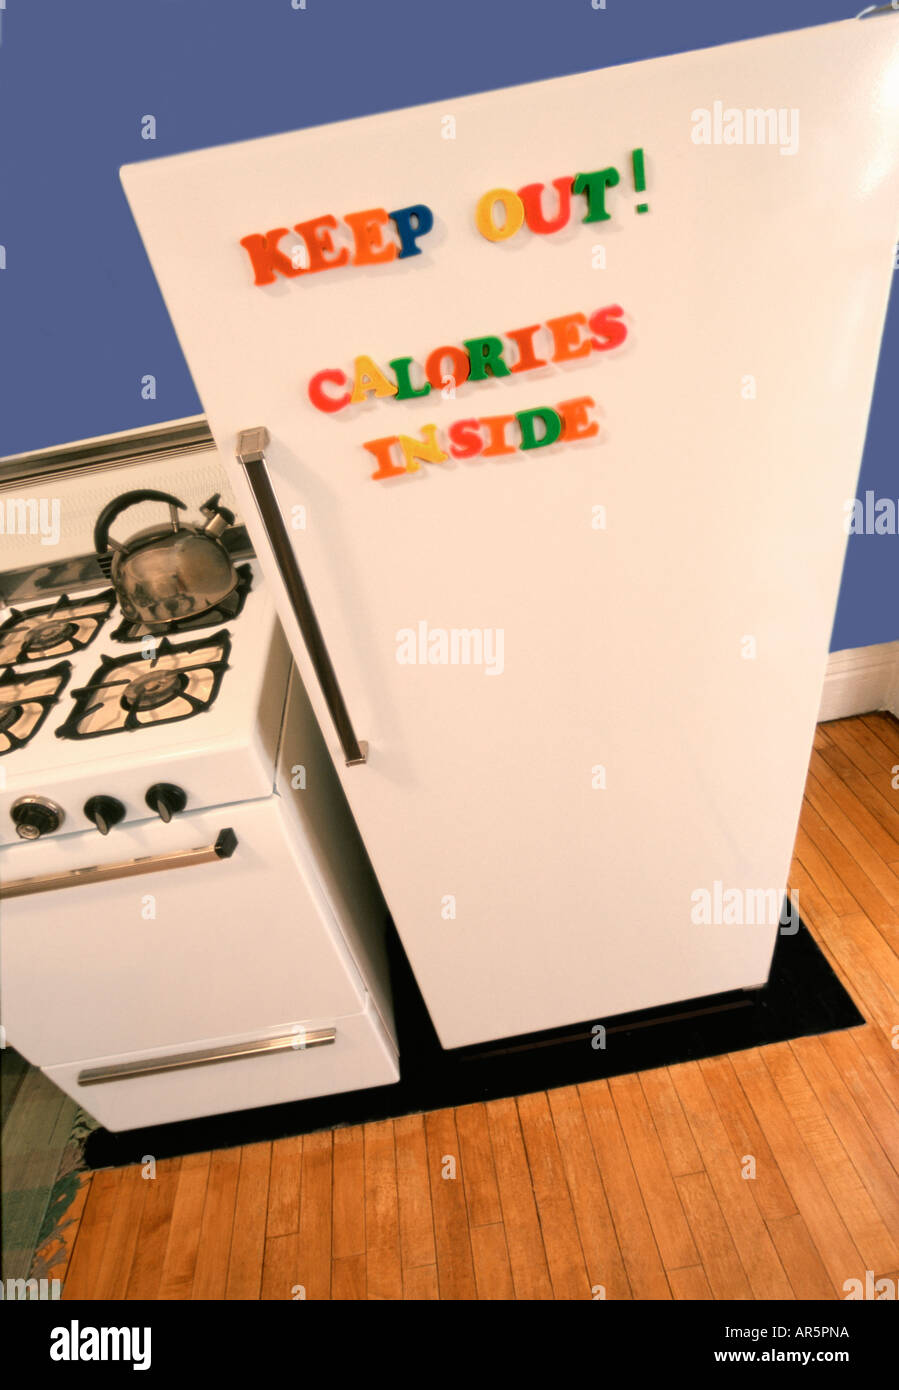 Refridgerator with letters spelling keep out calories inside Stock Photo